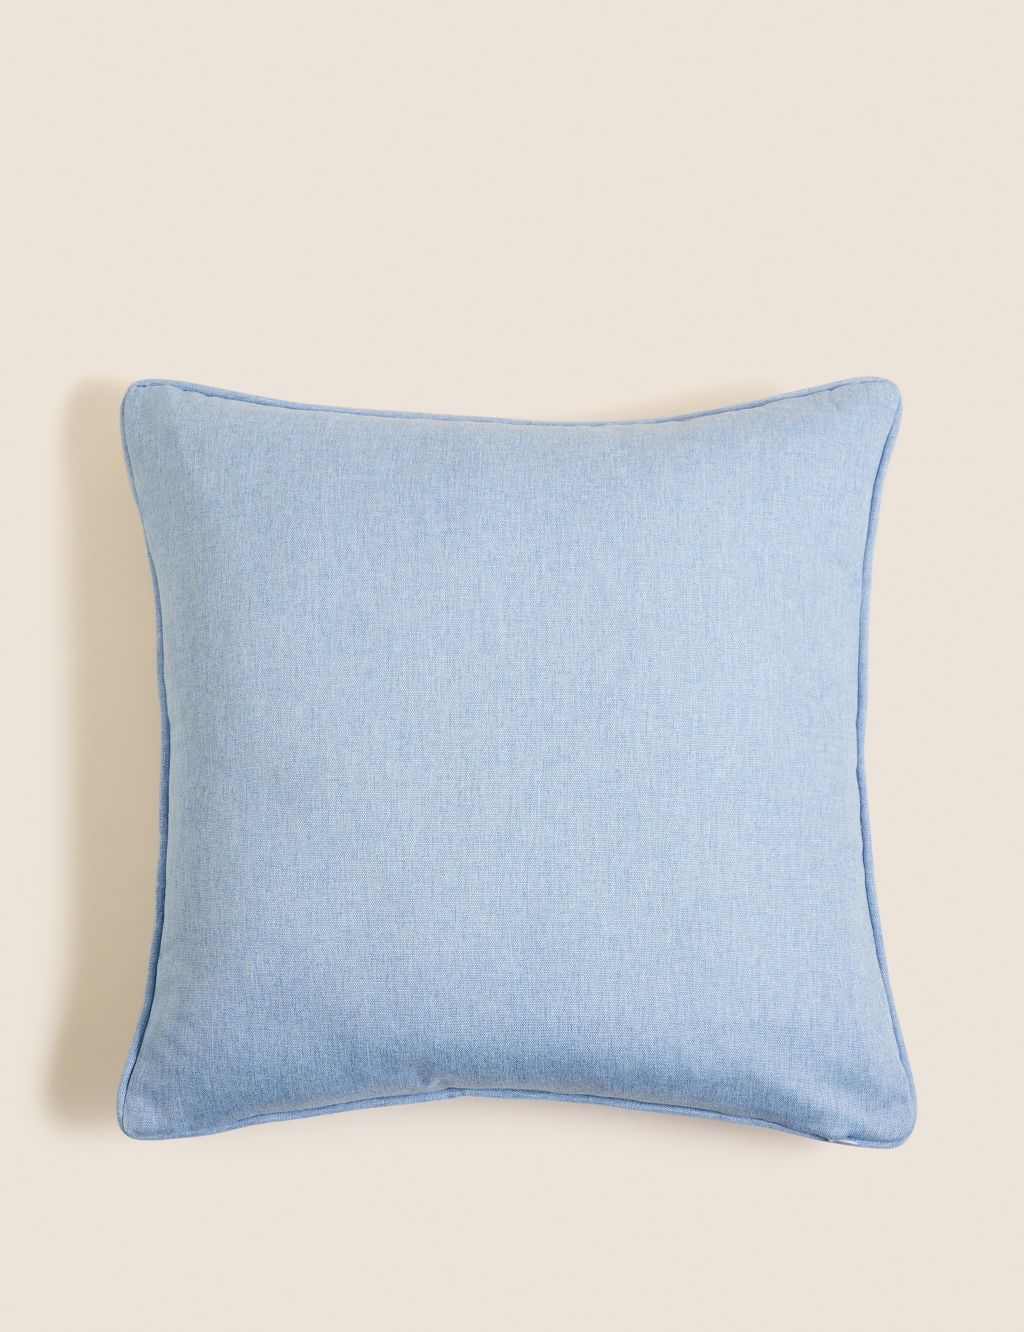 Piped Cushion image 1